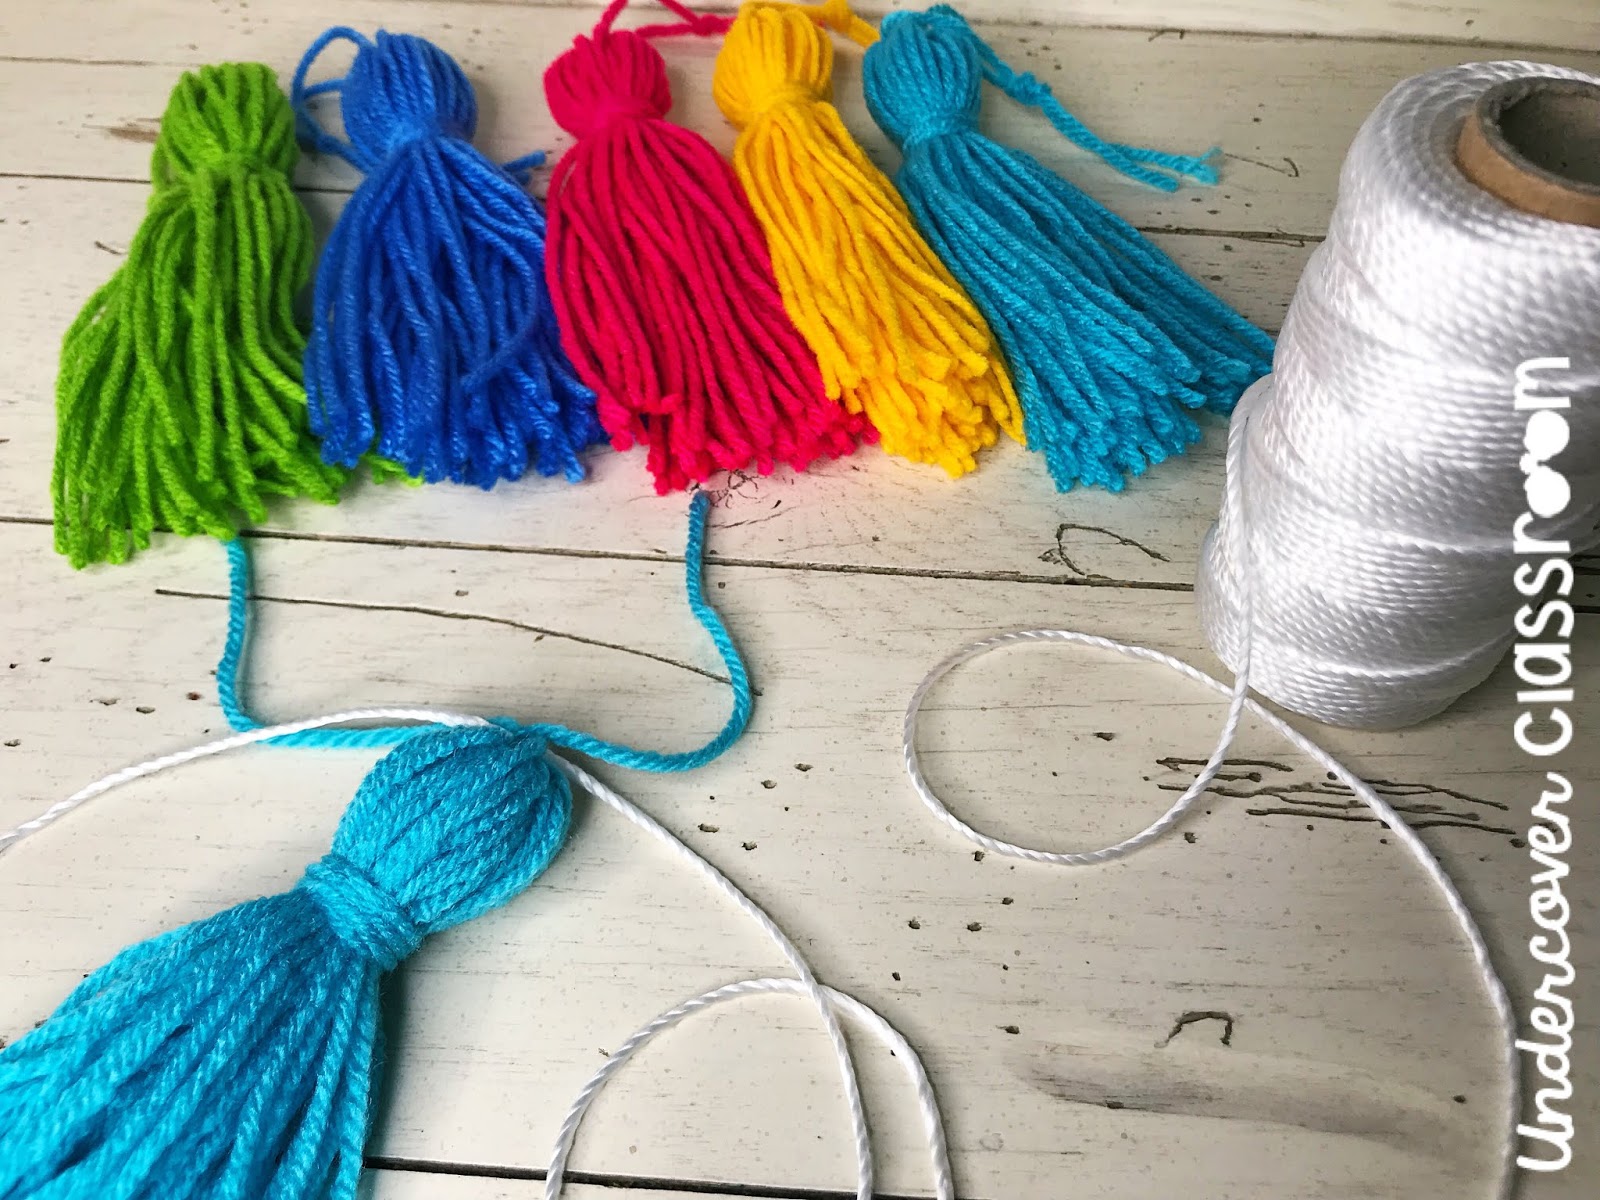 Spruce up your classroom with this DIY tassel garland. Follow these easy steps to make yarn tassels. It's easier than you think. Your bulletin boards will be looking jazzy in no time!